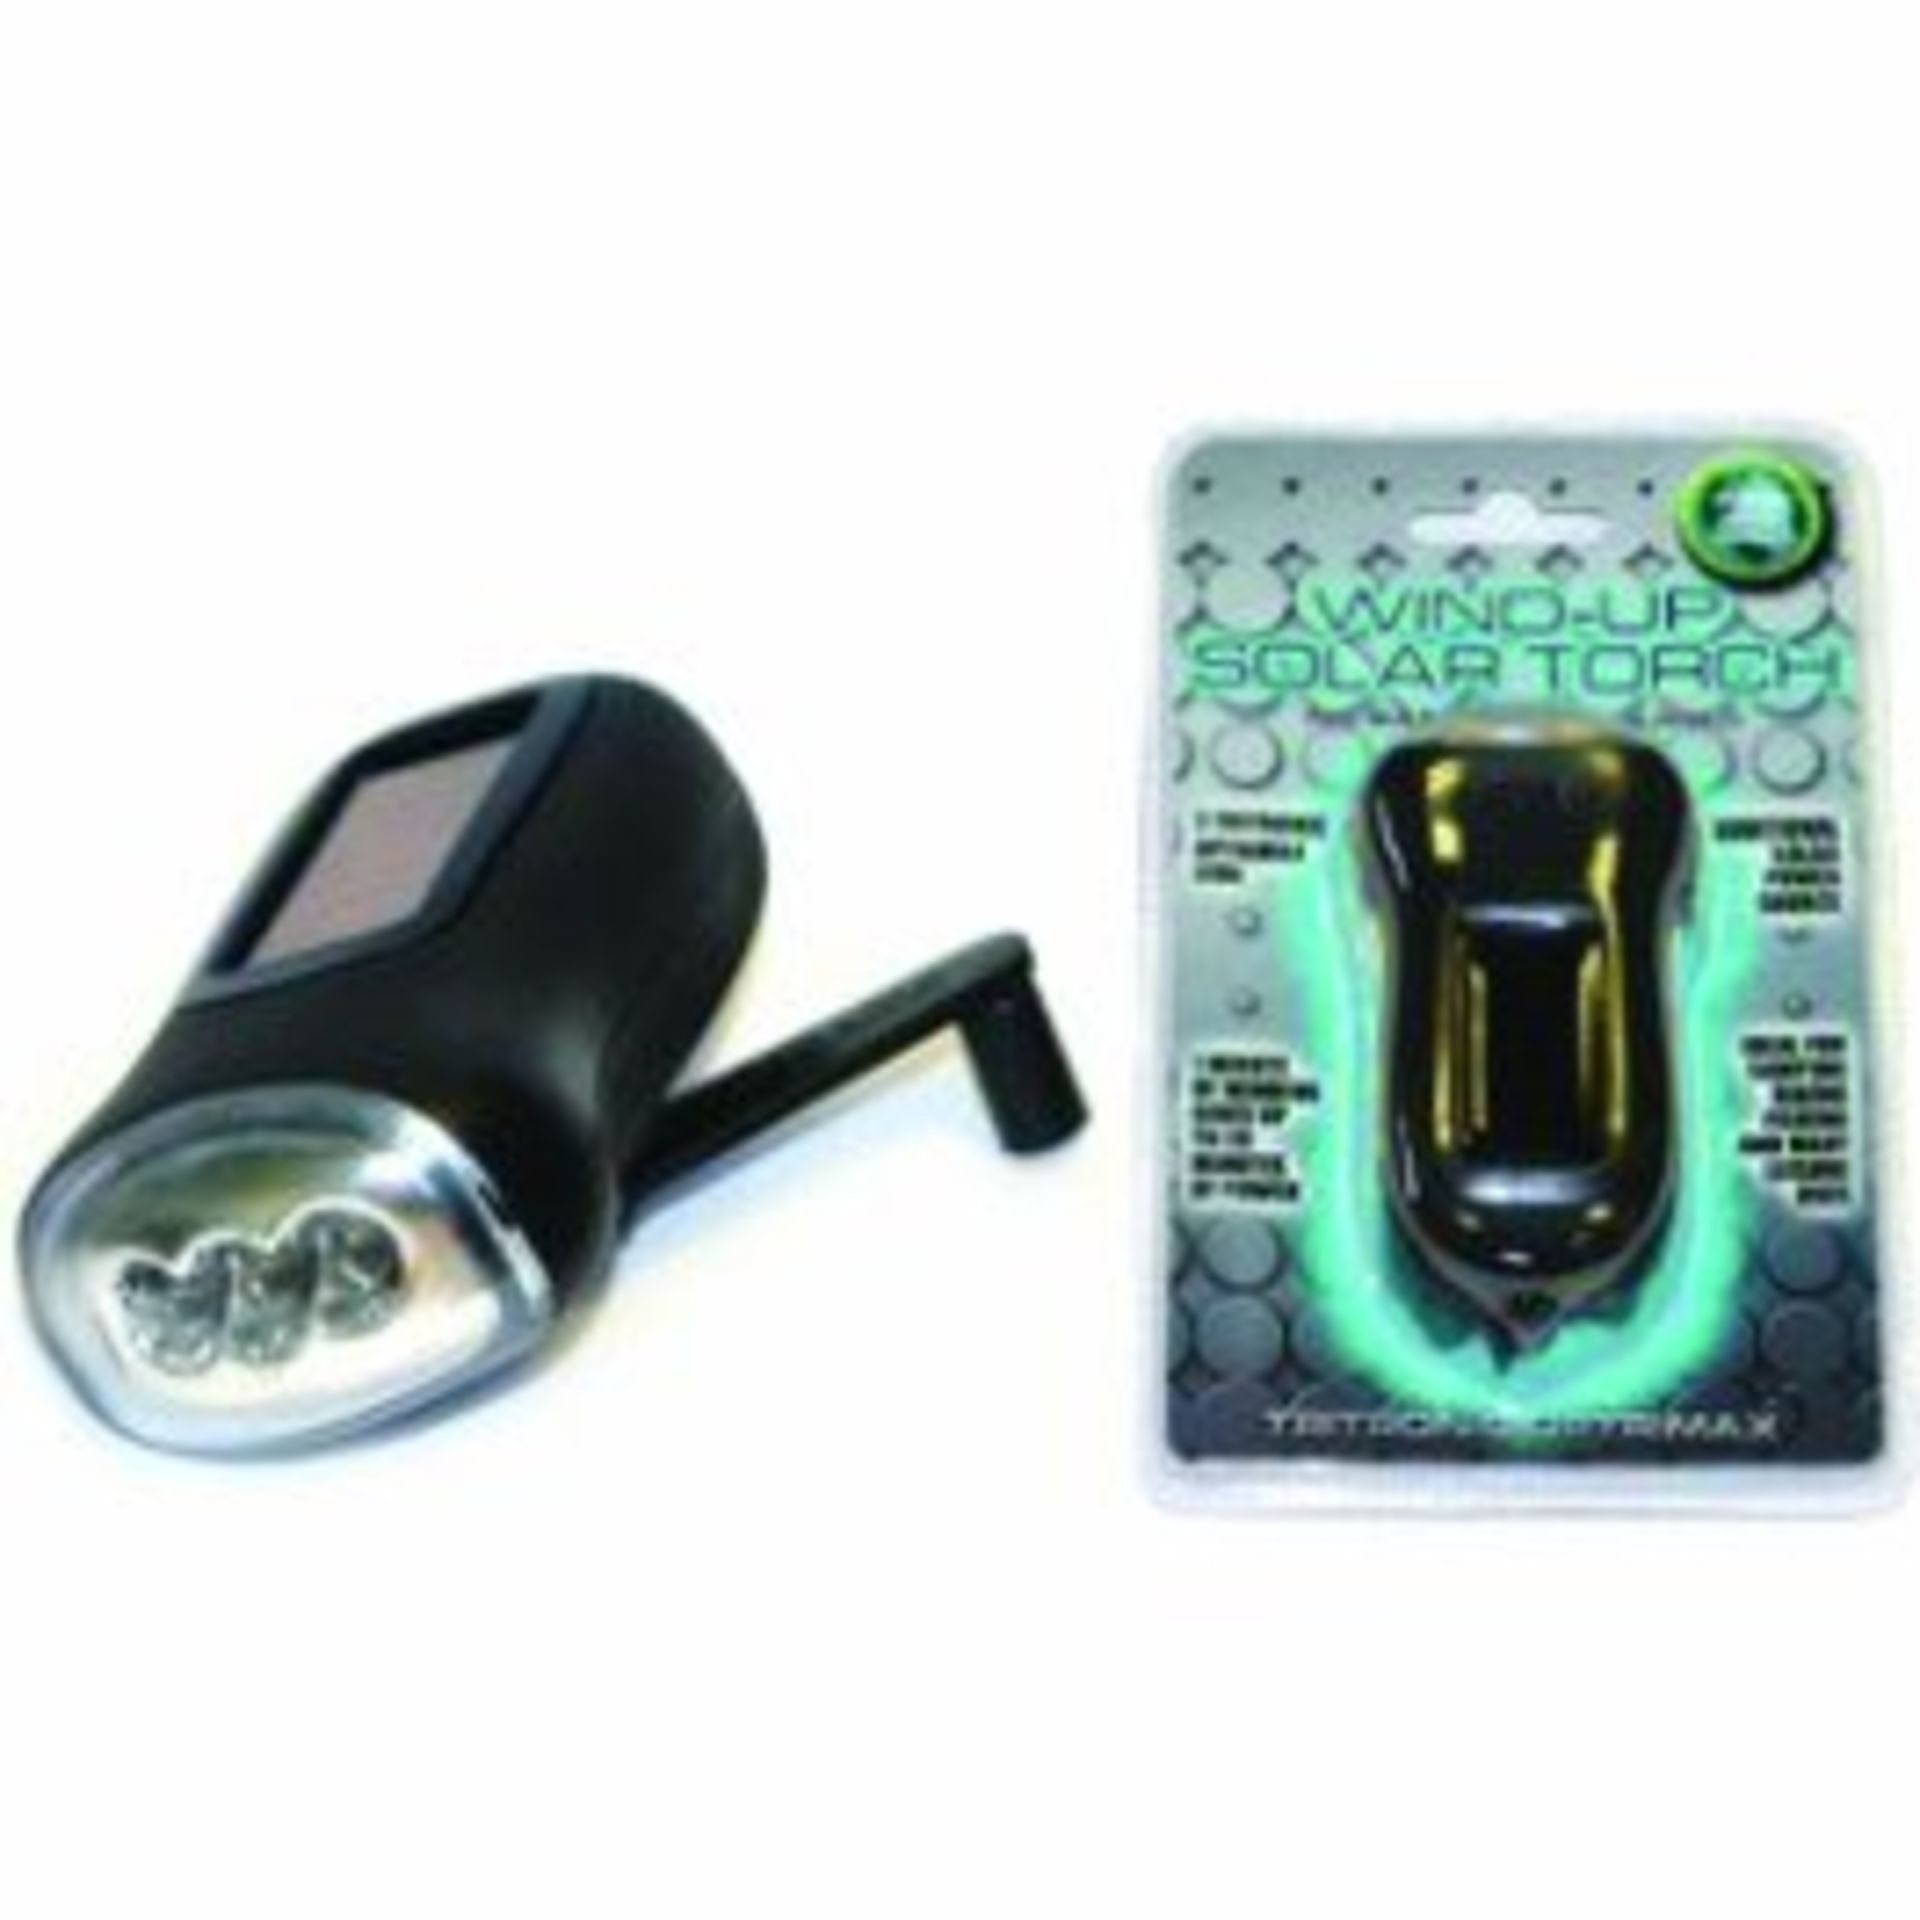 V Brand New Wind Up Solar Torch (1 Min Winding Gives 20 Mins Power Or Charge By Sunlight)